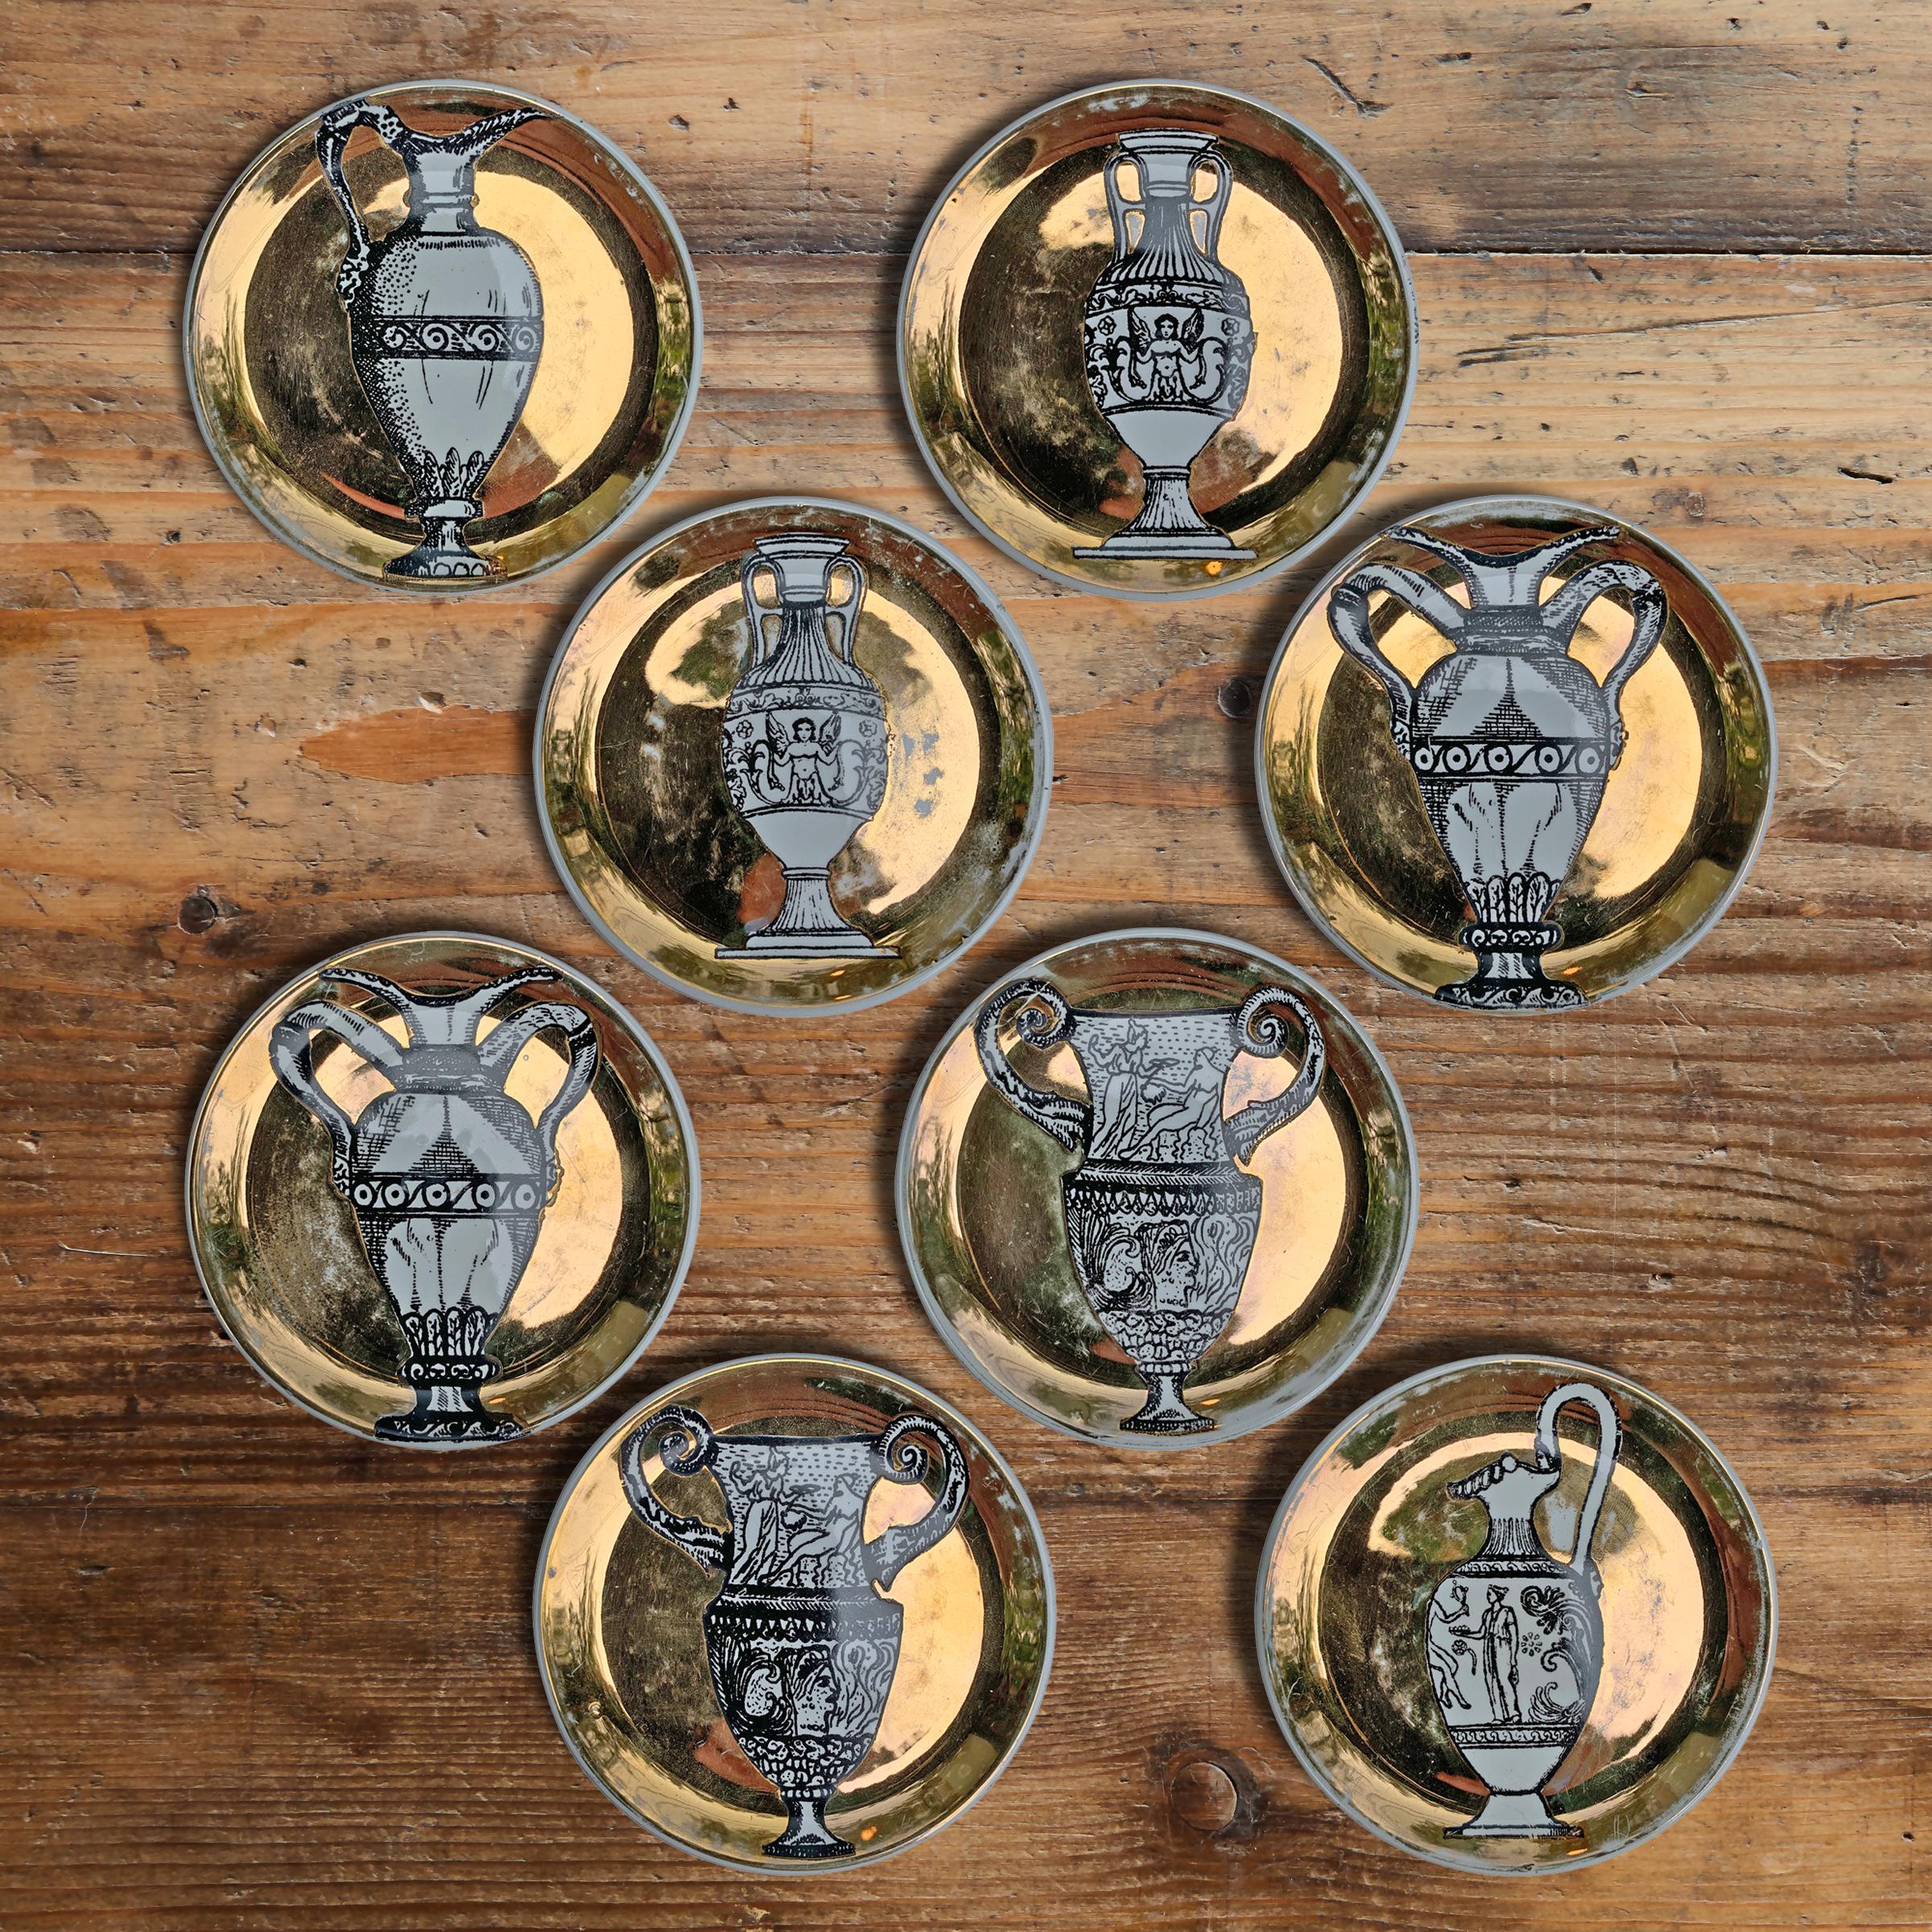 A fabulous set of eight vintage Italian Fornasetti-style gilt painted porcelain coasters, each with a classical Roman urn or vase. Marked 'Bucciarelli, Milano' on the back.